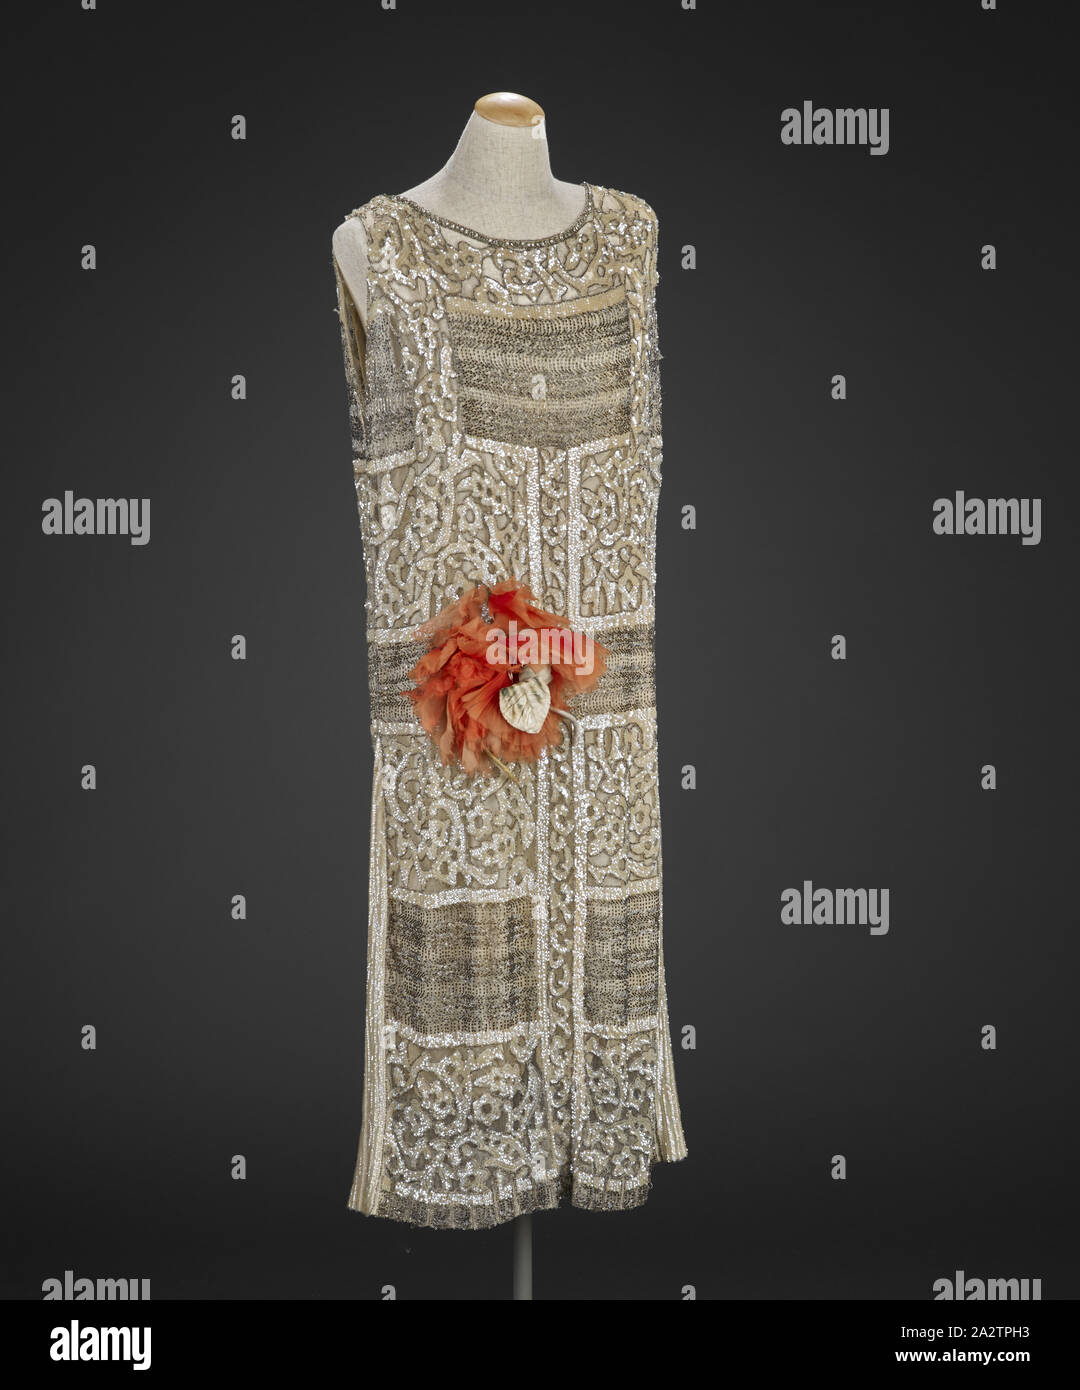 dress, Anna Griffin, Dressmaker (American, 1867-1951), 1920s, silk chiffon or netting, glass beads, sequins, center back 34 in., center front 41 in., bust 38 in., waist 38 in., shoulders 12 in., Textile and Fashion Arts Stock Photo